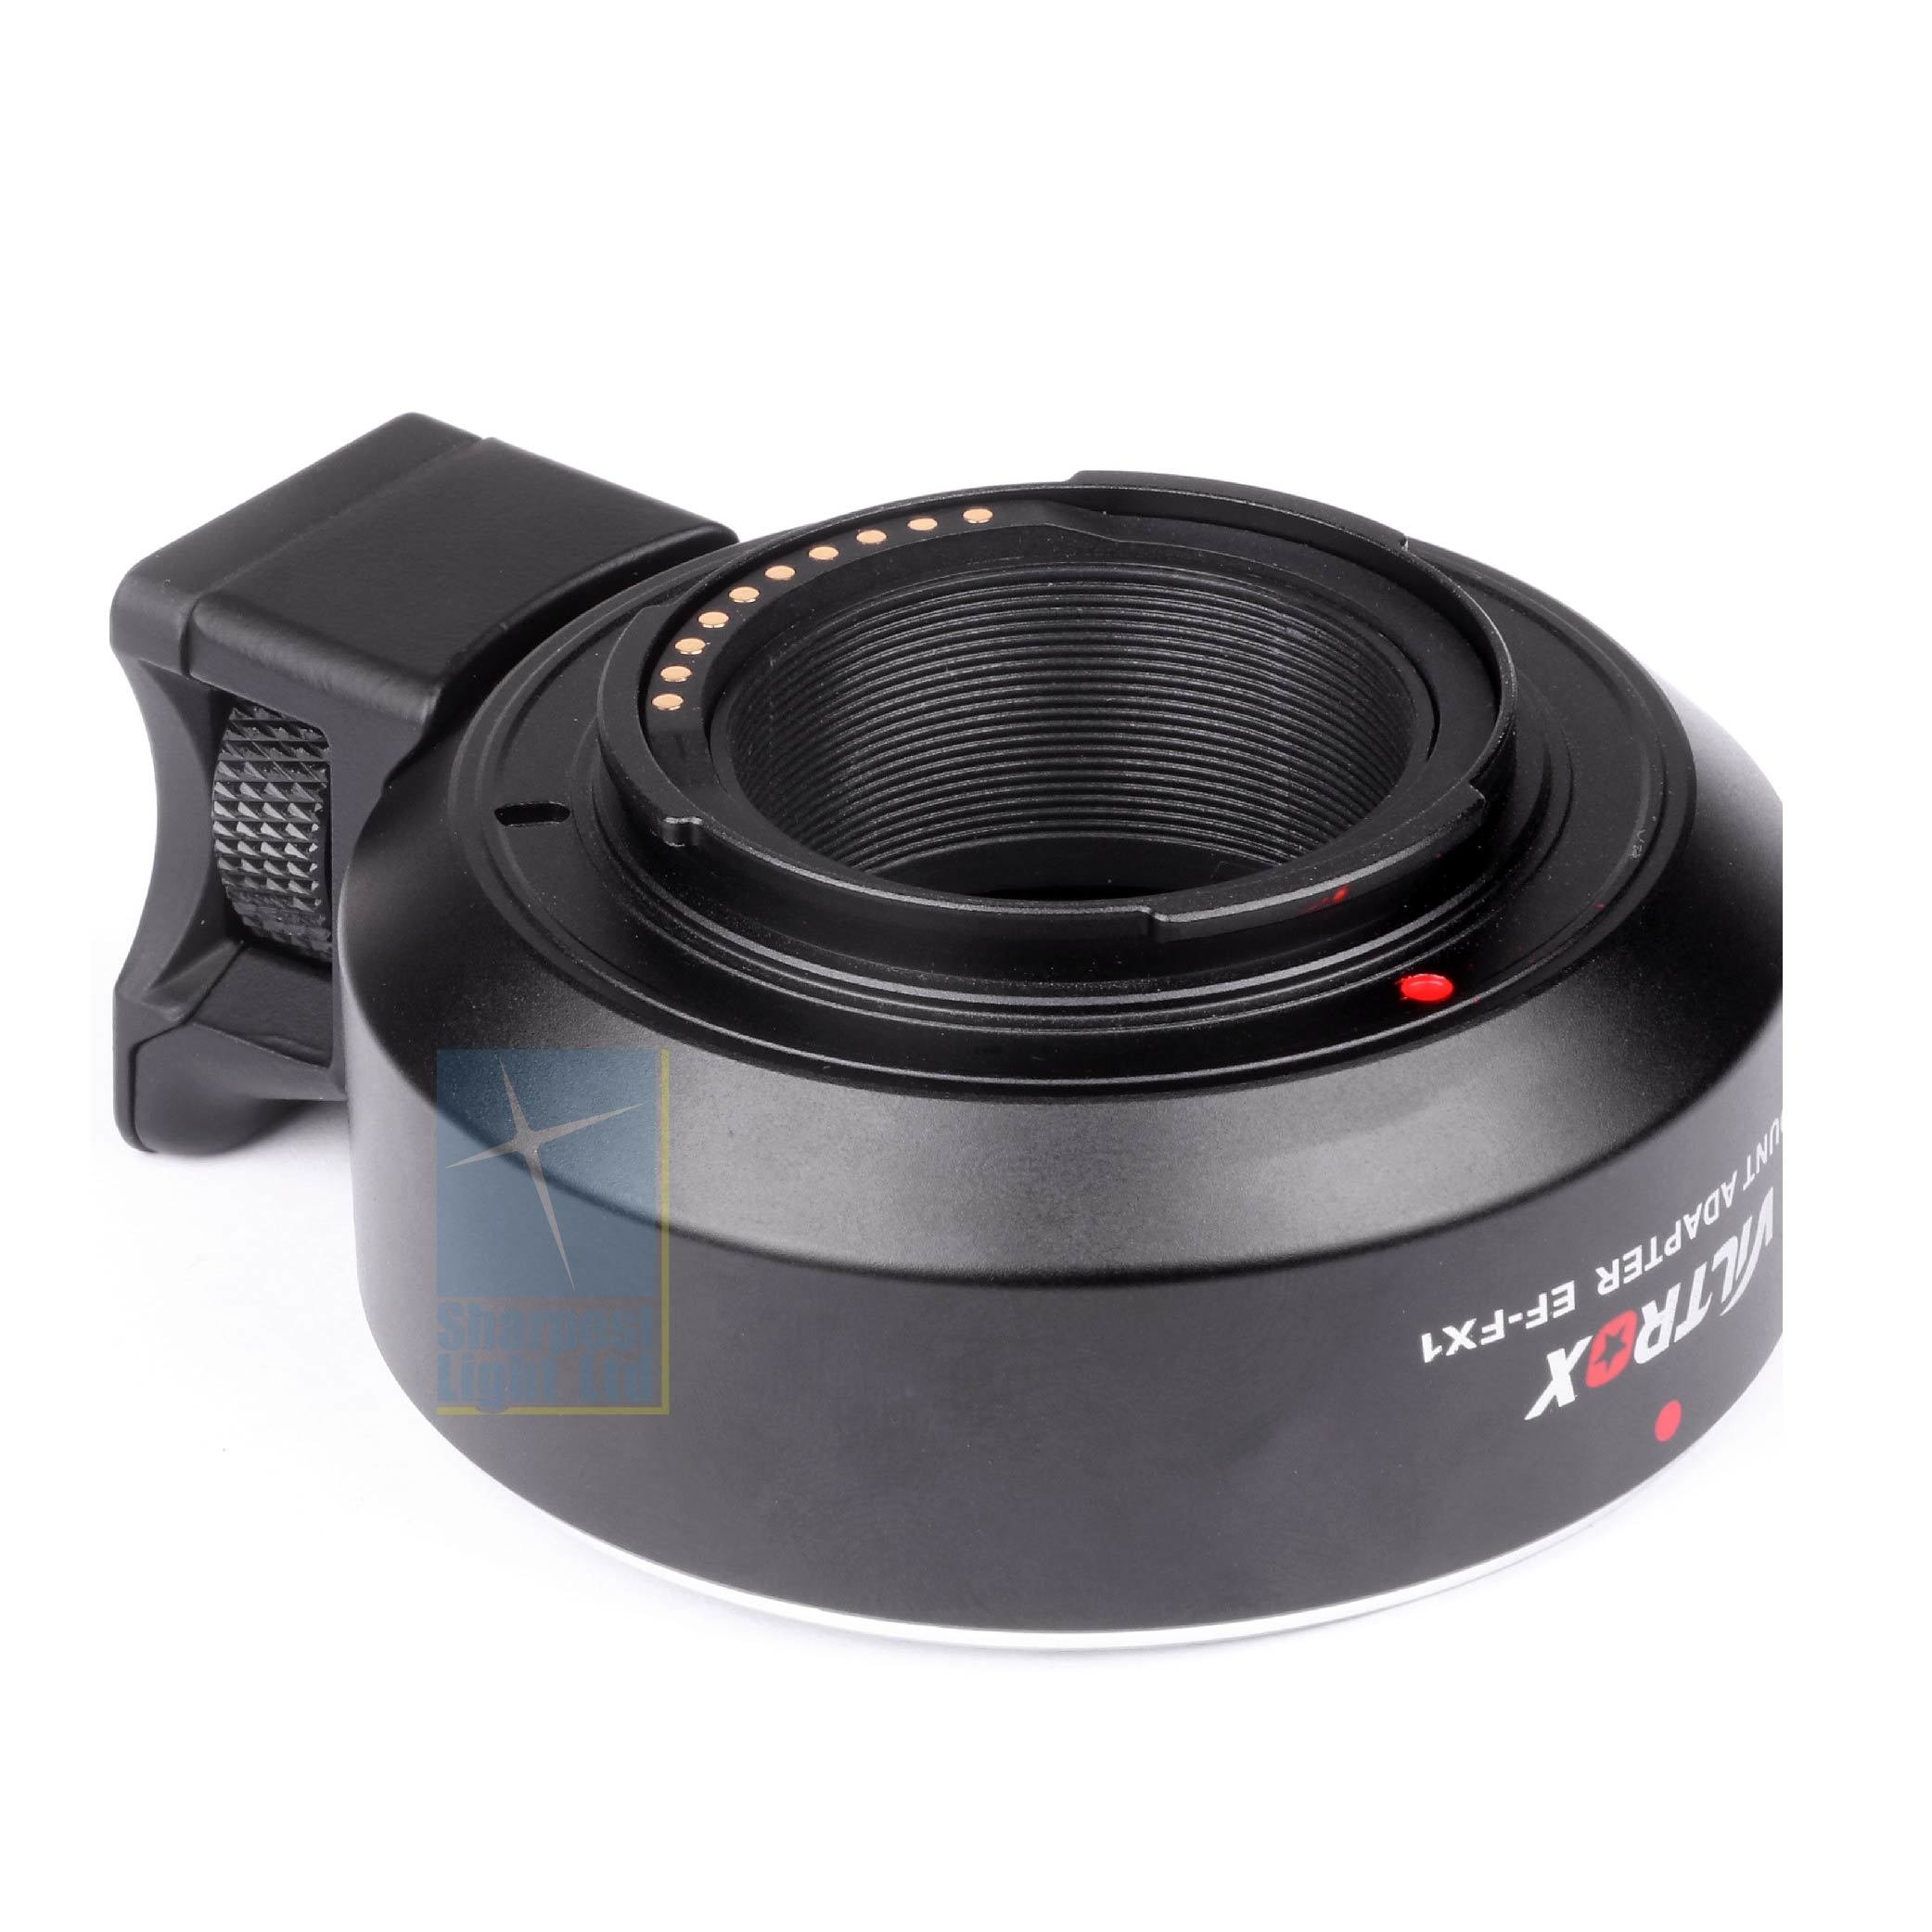 Viltrox EF-FX1 Electronic Adapter for Canon Lens to Fuji X Mount Camera